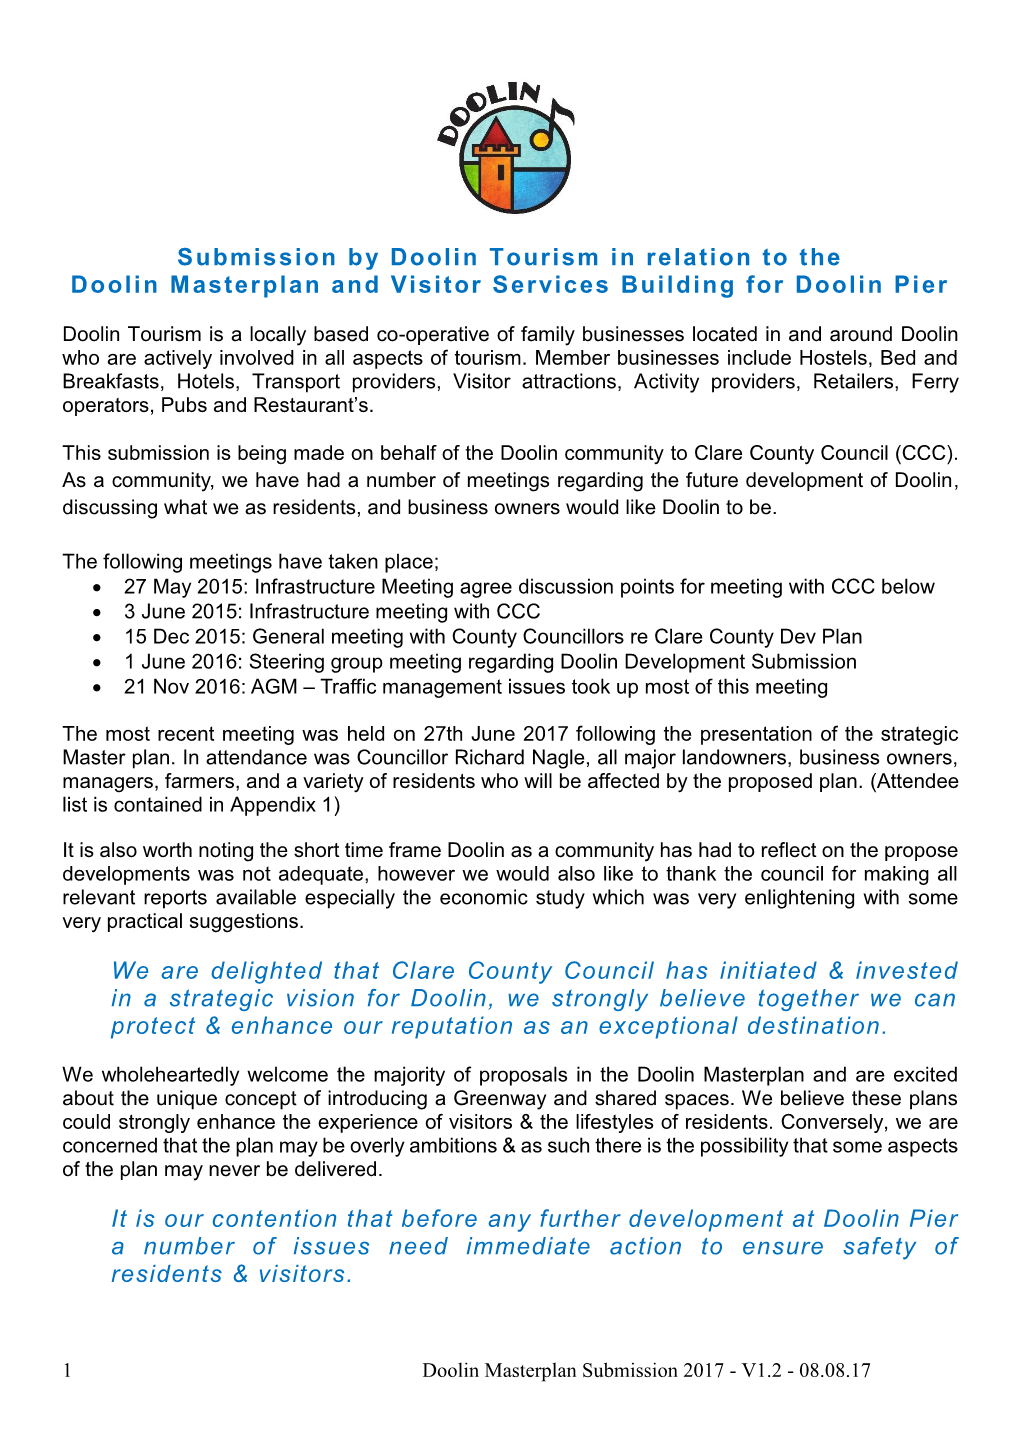 Agenda for Strategic Meeting Between Doolin Tourism and Clare County